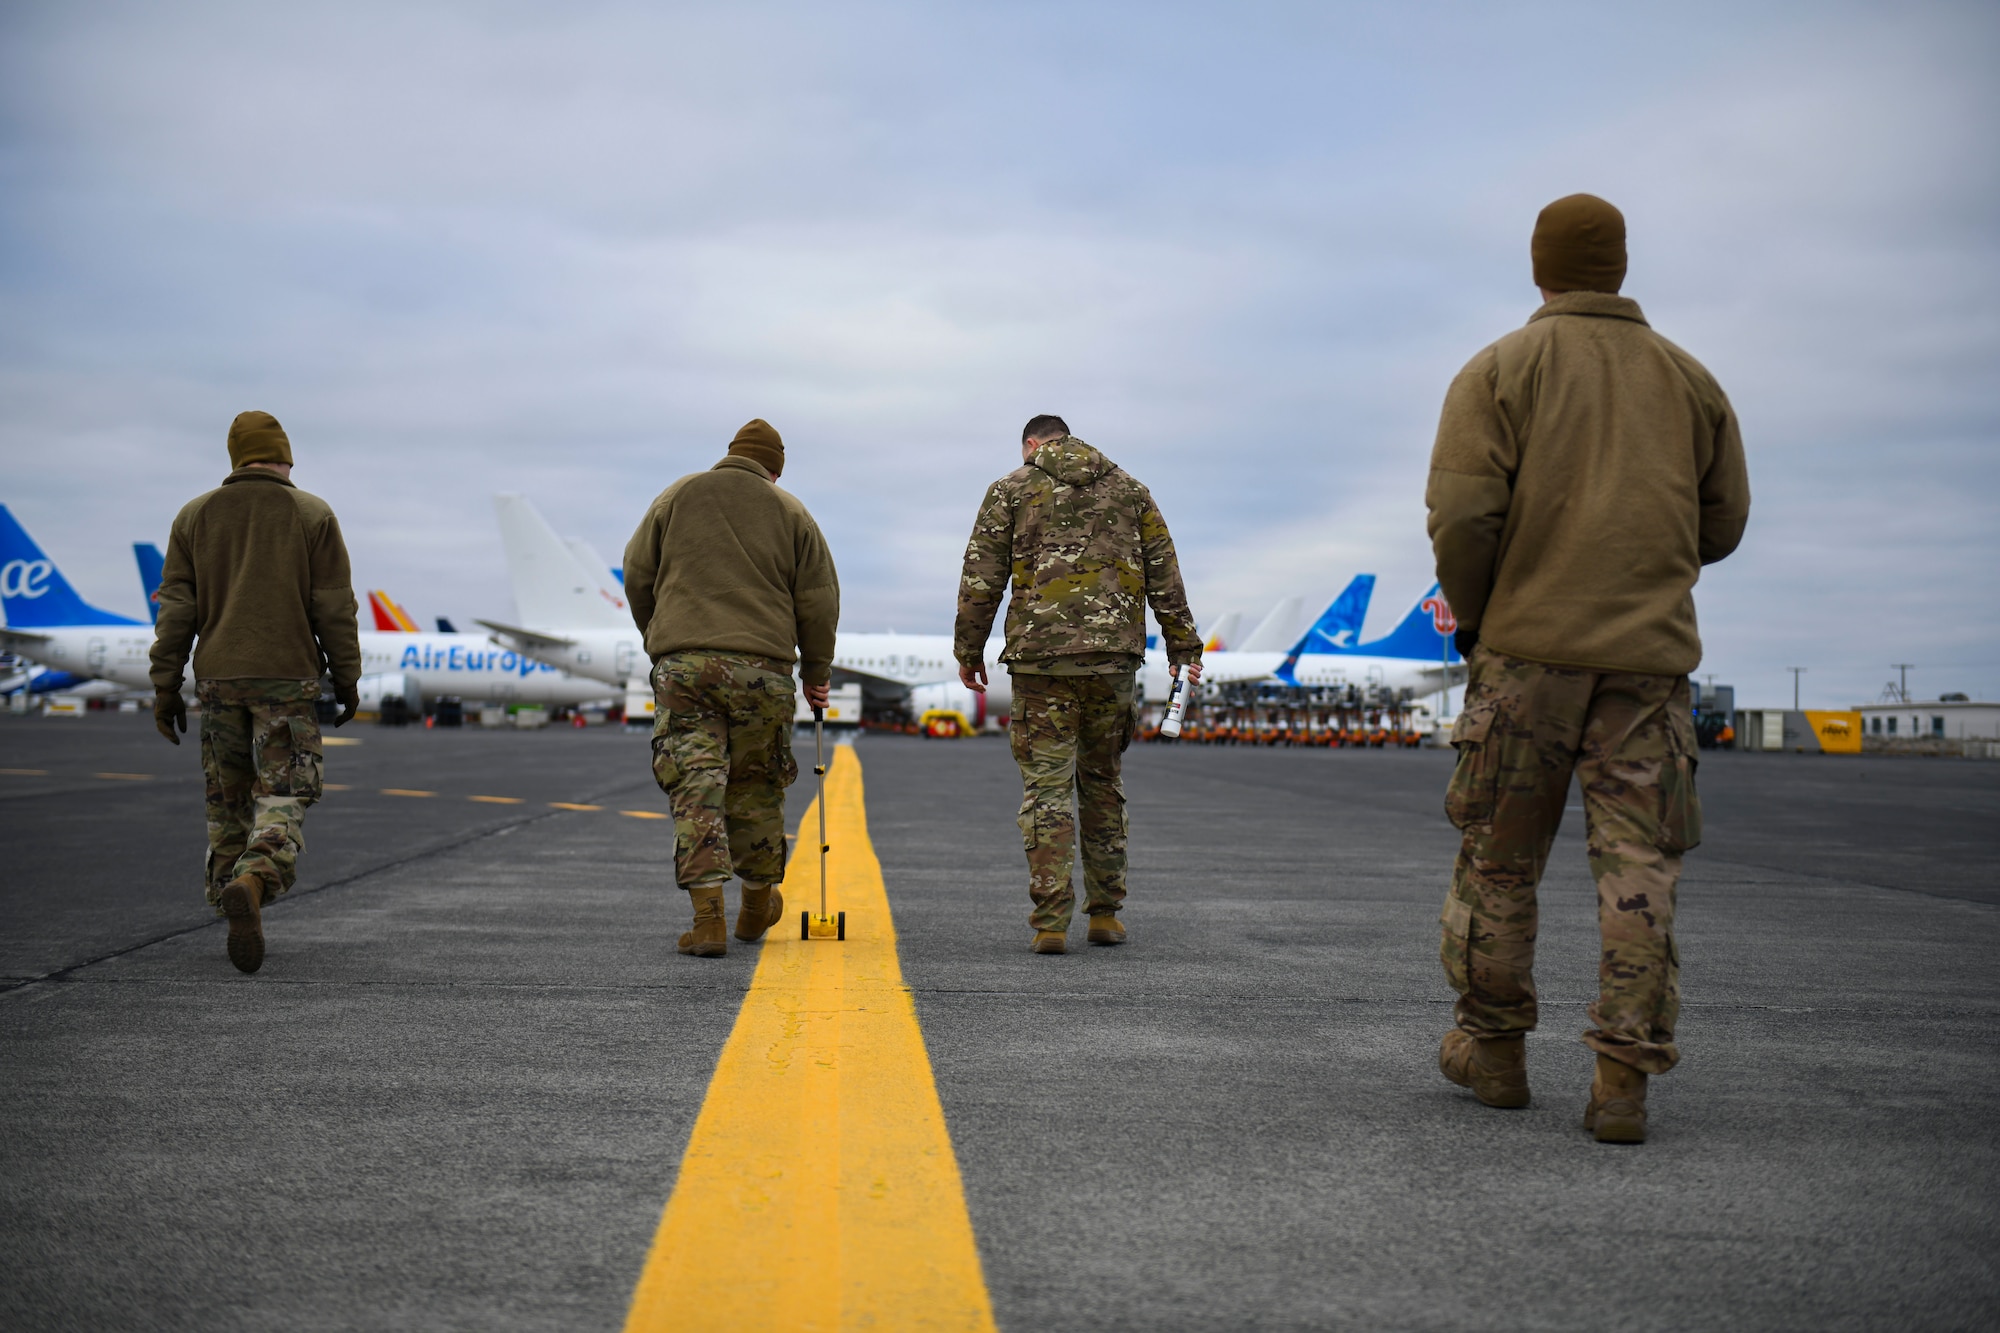 U.S. Air Force Airmen from the 92nd Maintenance Squadron, the 92nd Security Forces Squadron, and the 92nd Operations Support Squadron, measure the distance on a flightline for a potential parking spot for a KC-135 Stratotanker at Grant County International Airport in Moses Lake, Washington, Dec. 6, 2021. The Airmen were prepared to accomplish the primary mission of agile combat employment from a civilian airfield and adapt and prepare for an emergency diversion of four additional aircraft, including a KC-46 Pegasus, an aircraft most Airmen were not familiar with. (U.S. Air Force photo by Senior Airman Kiaundra Miller)